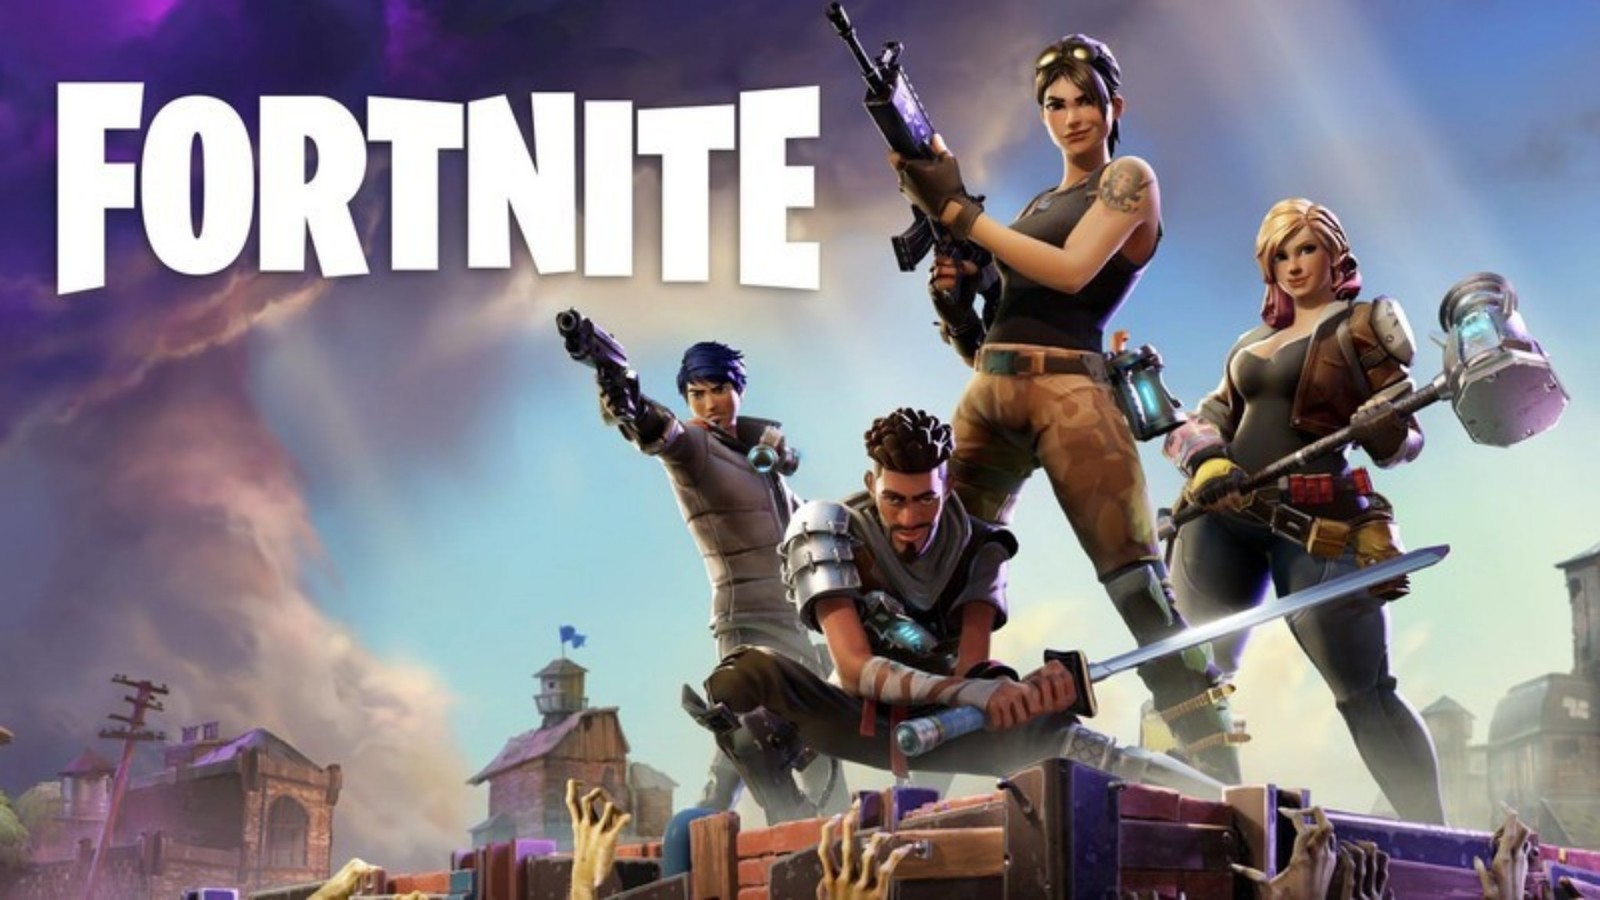 DuckyTheGamer on X: Nvidia GeForce Now cloud gaming currently is at max  capacity for free users.. Even if someone wanted to they couldn't play  Fortnite on iOS cause they can't get into